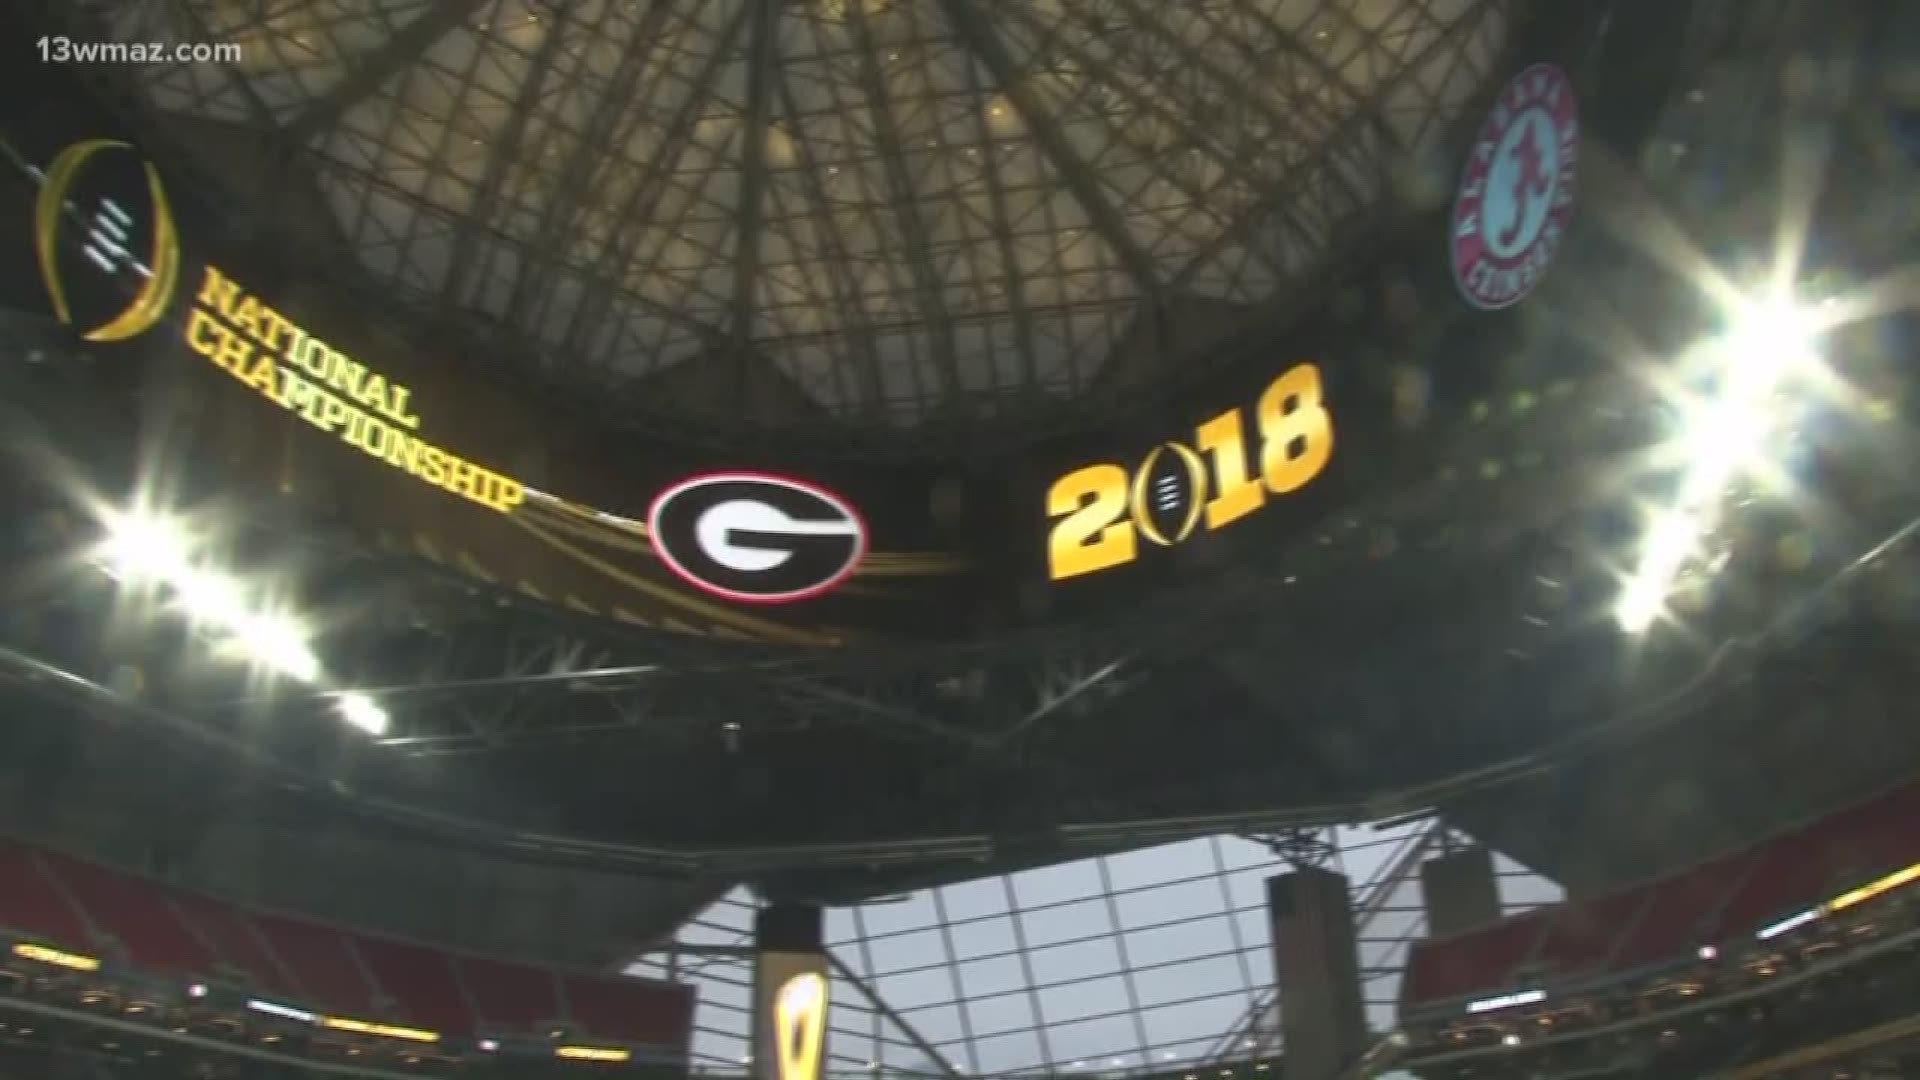 Doors open for national championship game